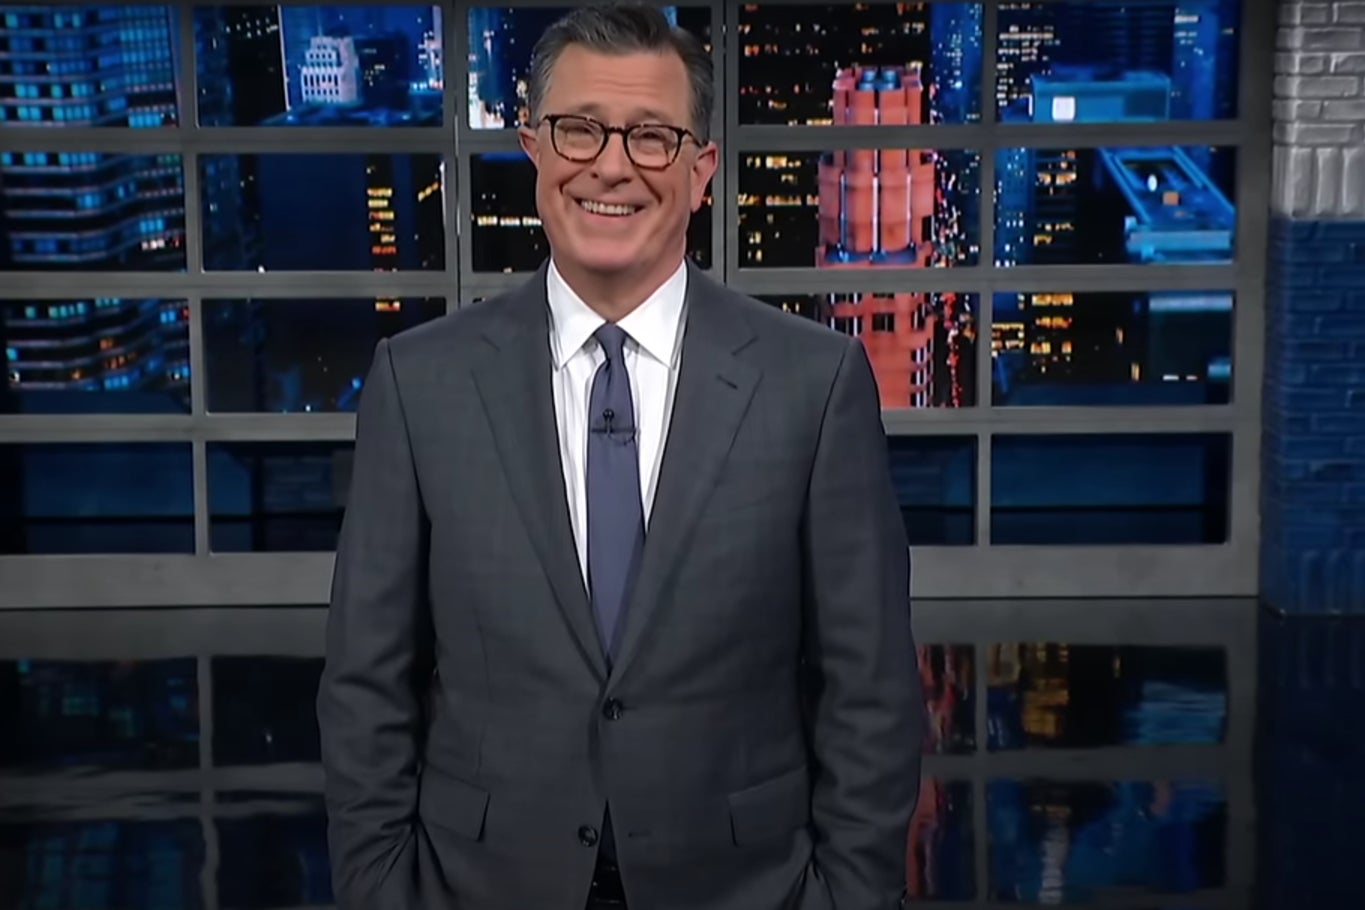 The Late Show host Stephen Colbert cracked up during his opening monologue on June 3 as his audience reacted to Donald Trump’s conviction